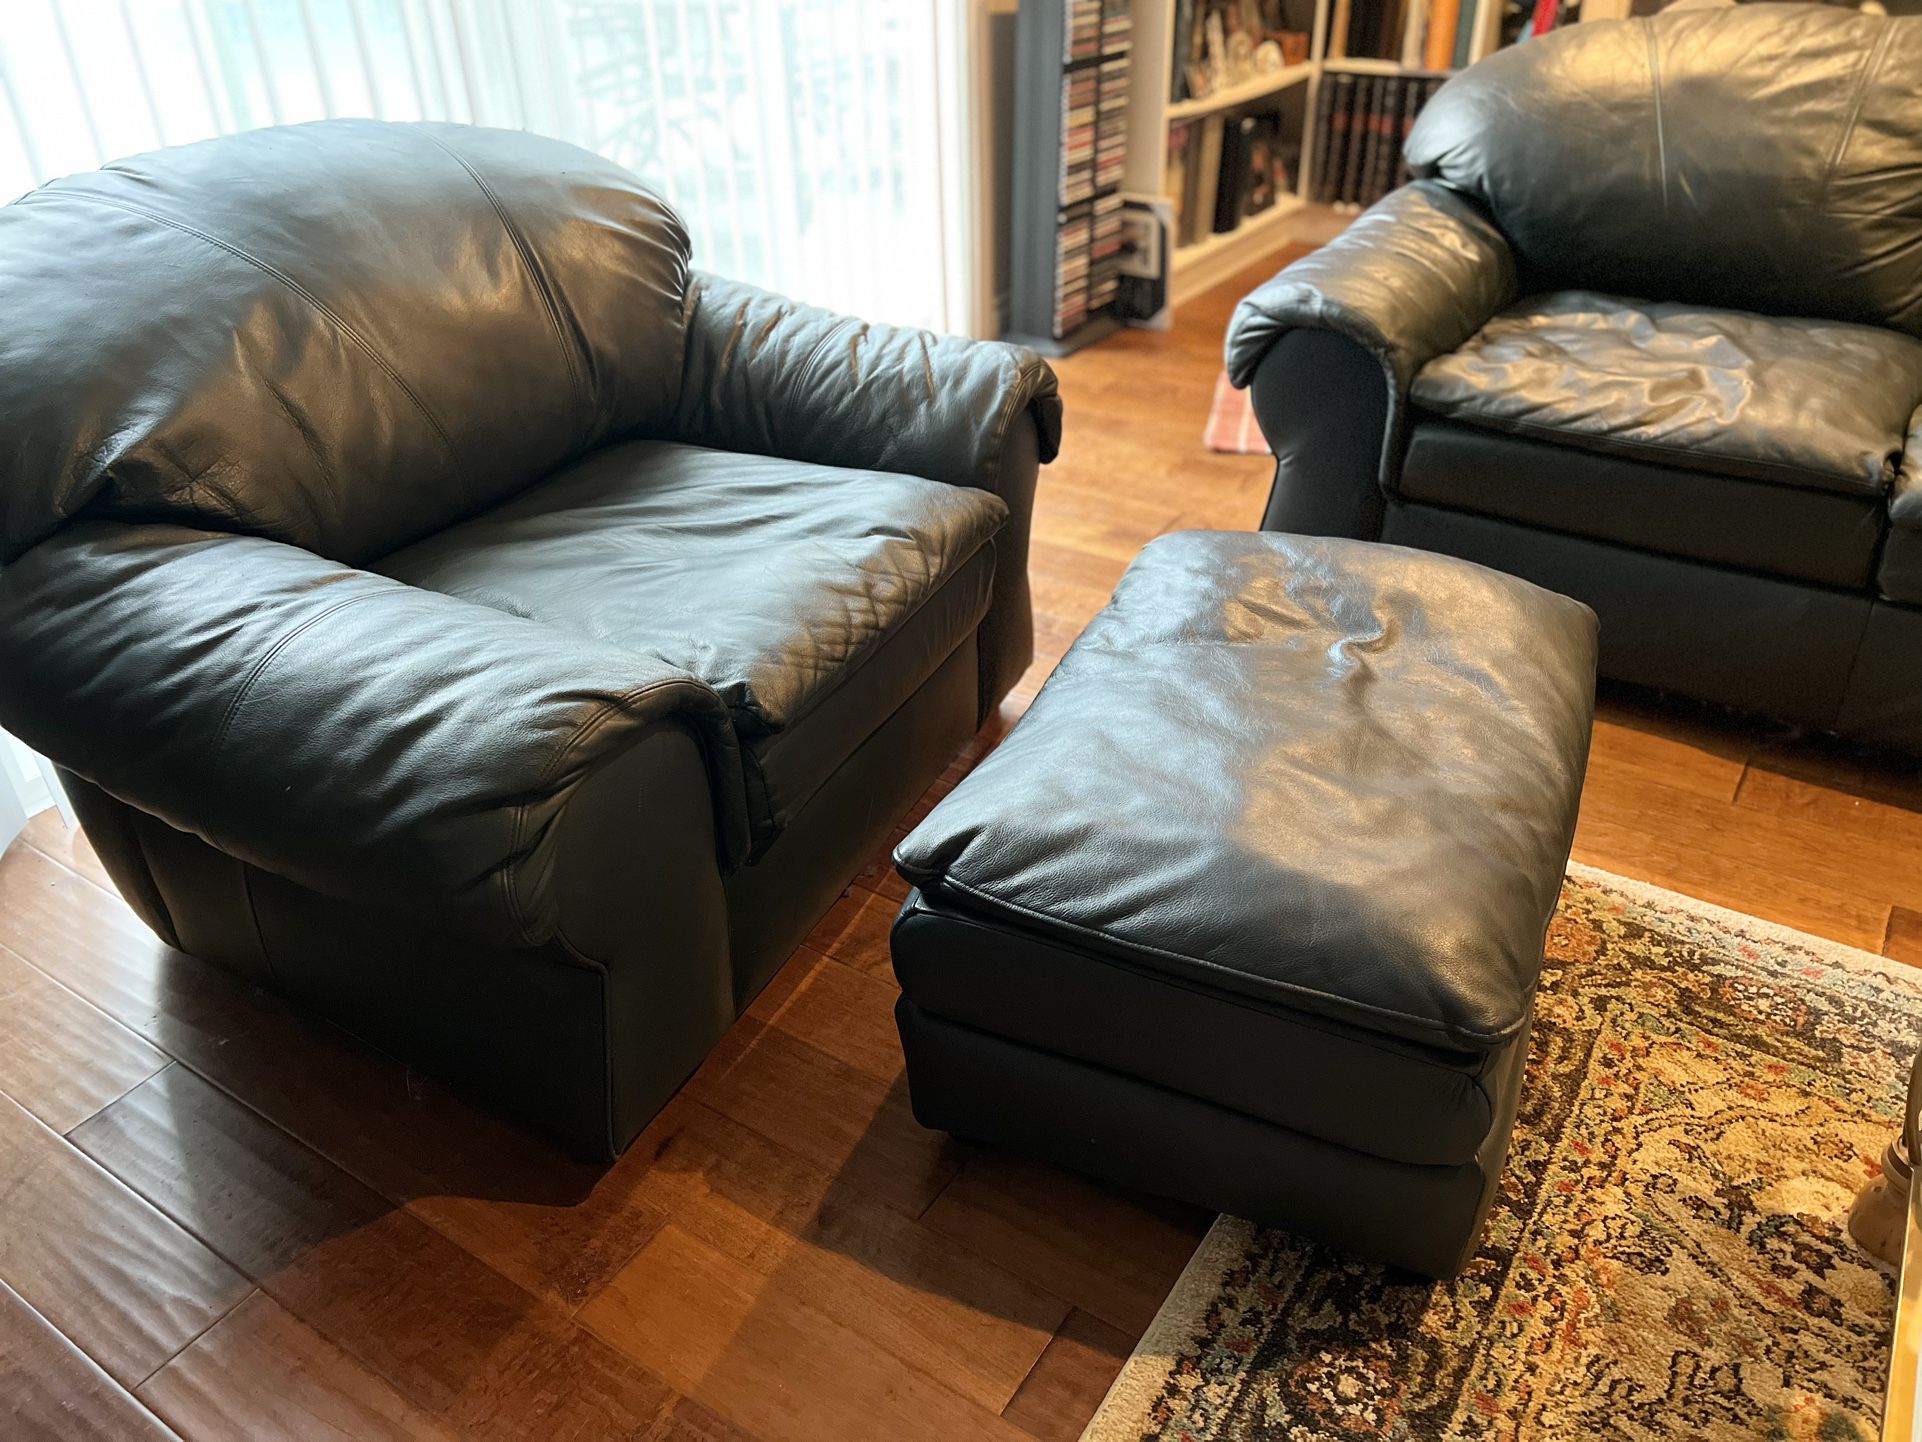 4 Piece Leather Sofa Set With Chair & Ottoman 